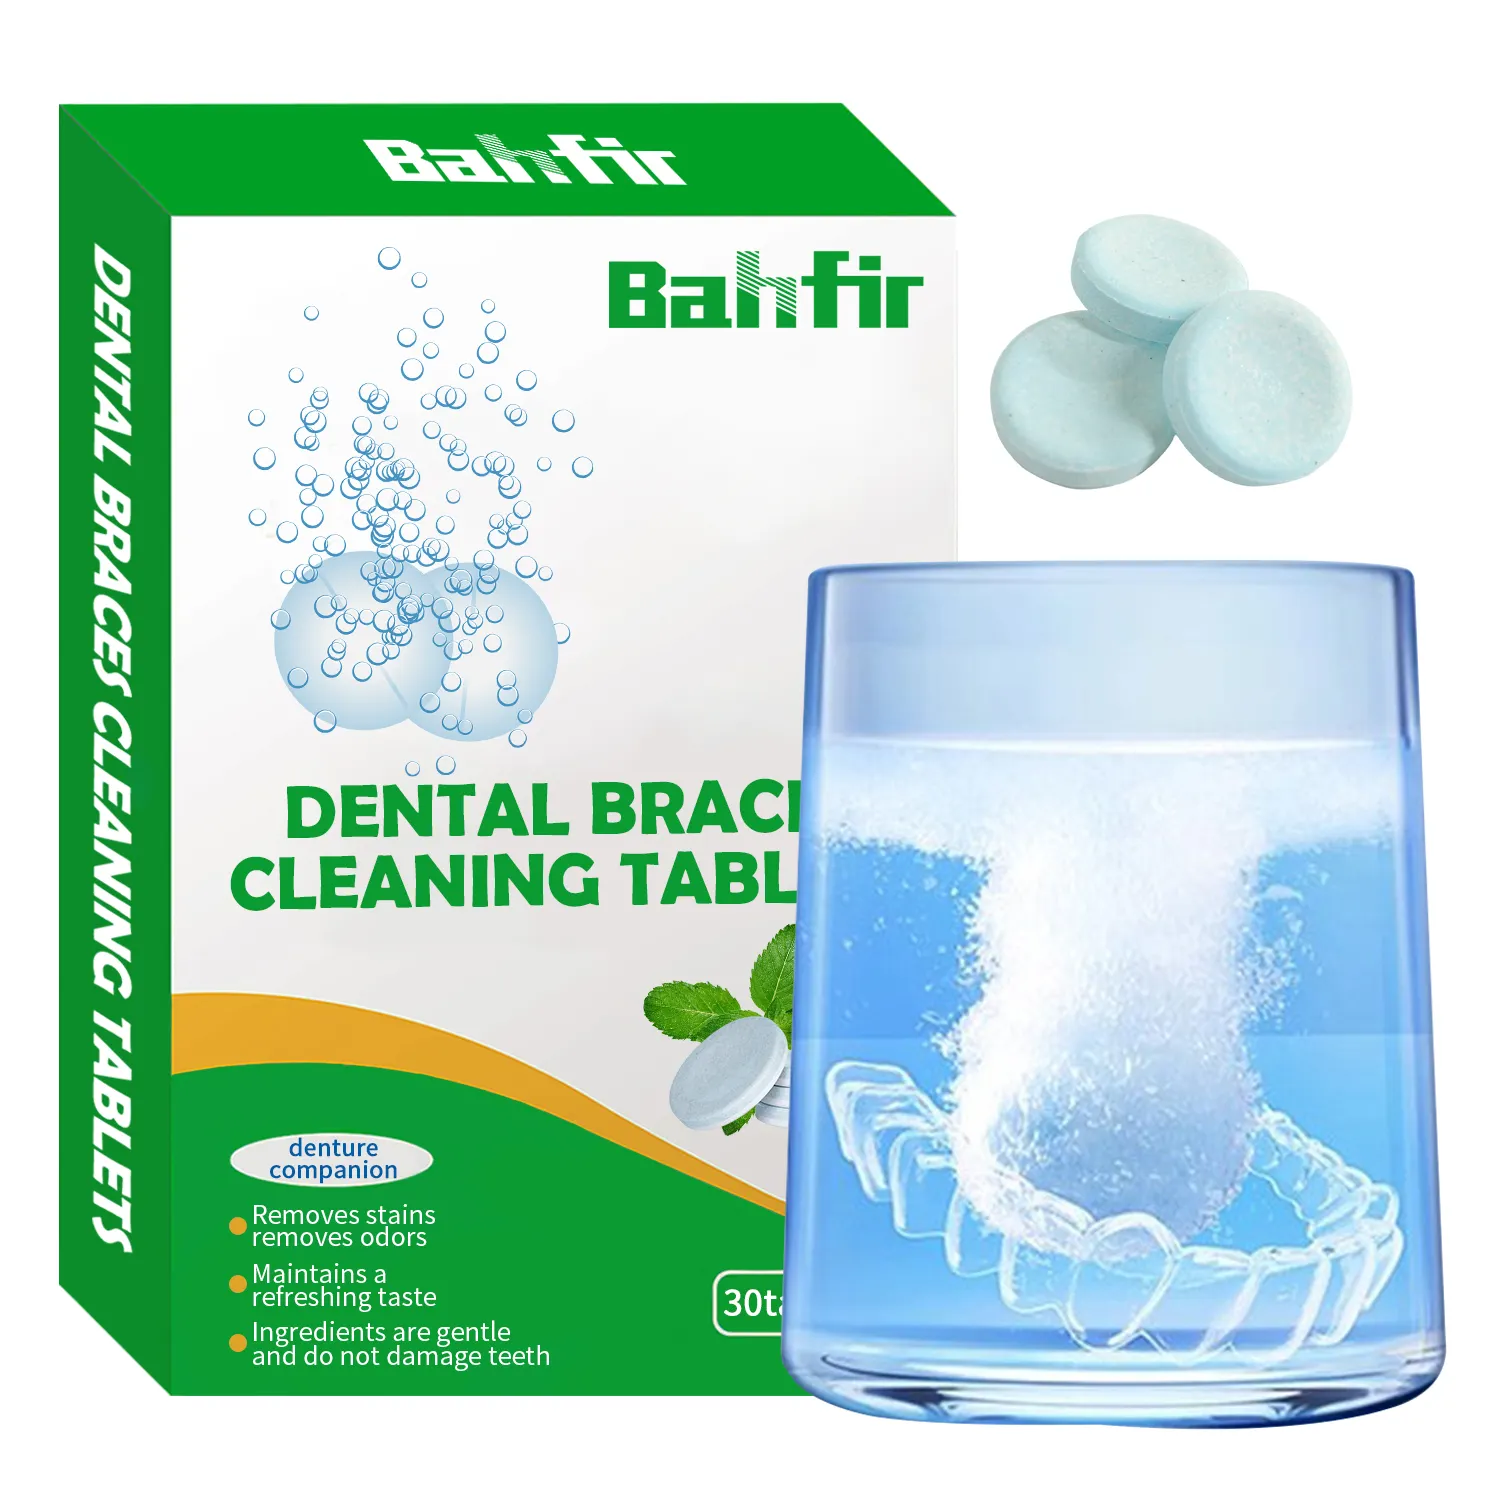 Dental Cleaning Tablets by Good Quality and Low Price Product to Clean Your Teeth with Value